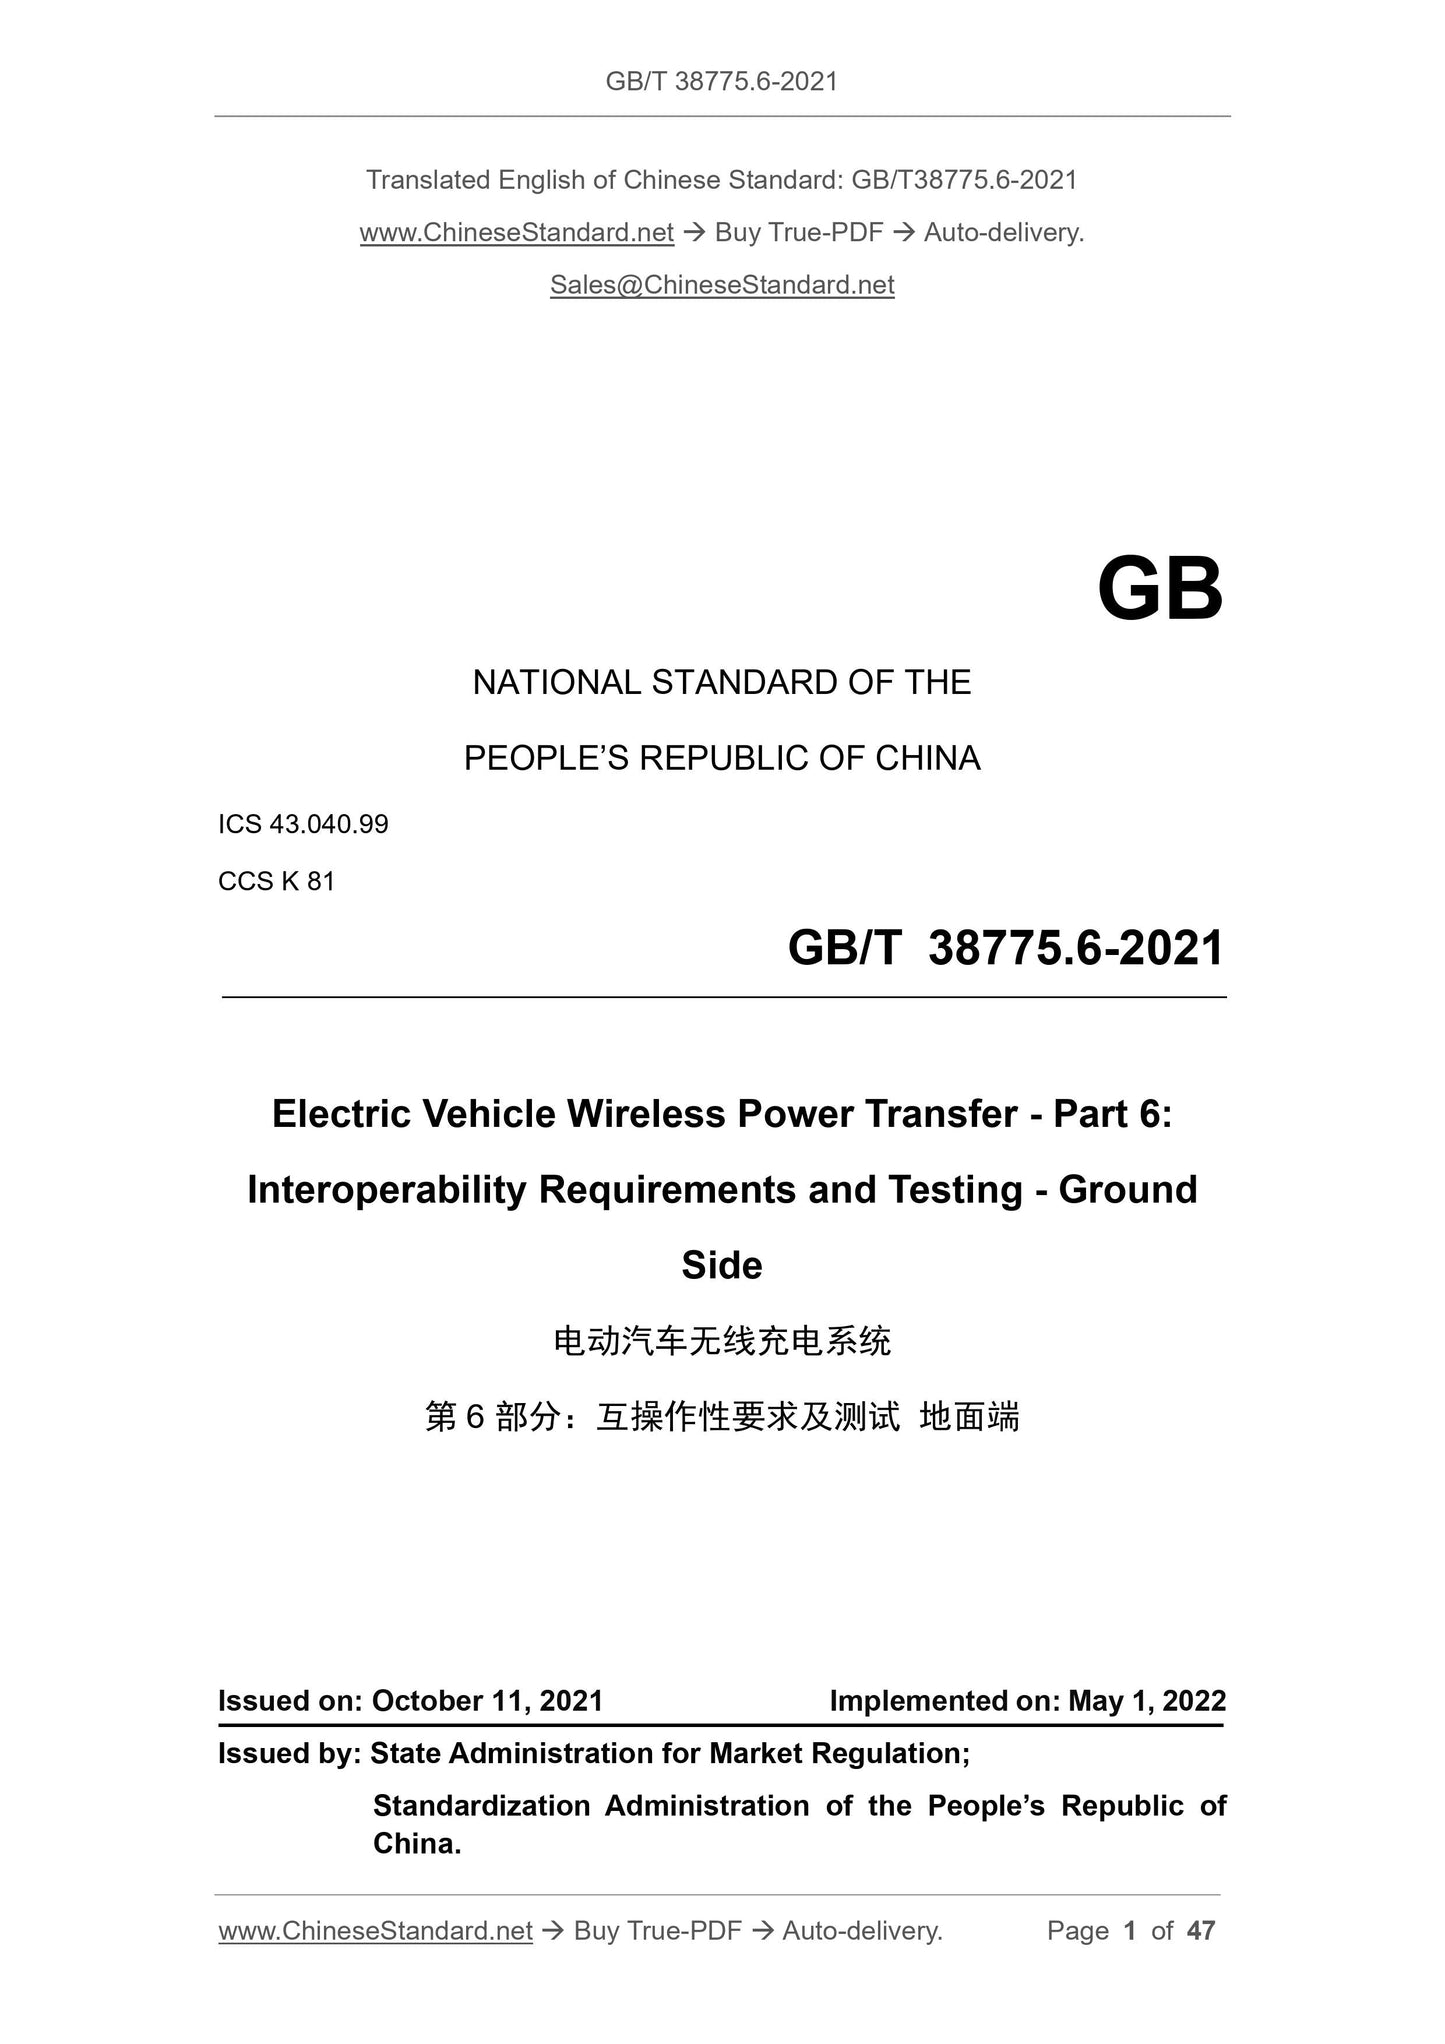 GB/T 38775.6-2021 Page 1